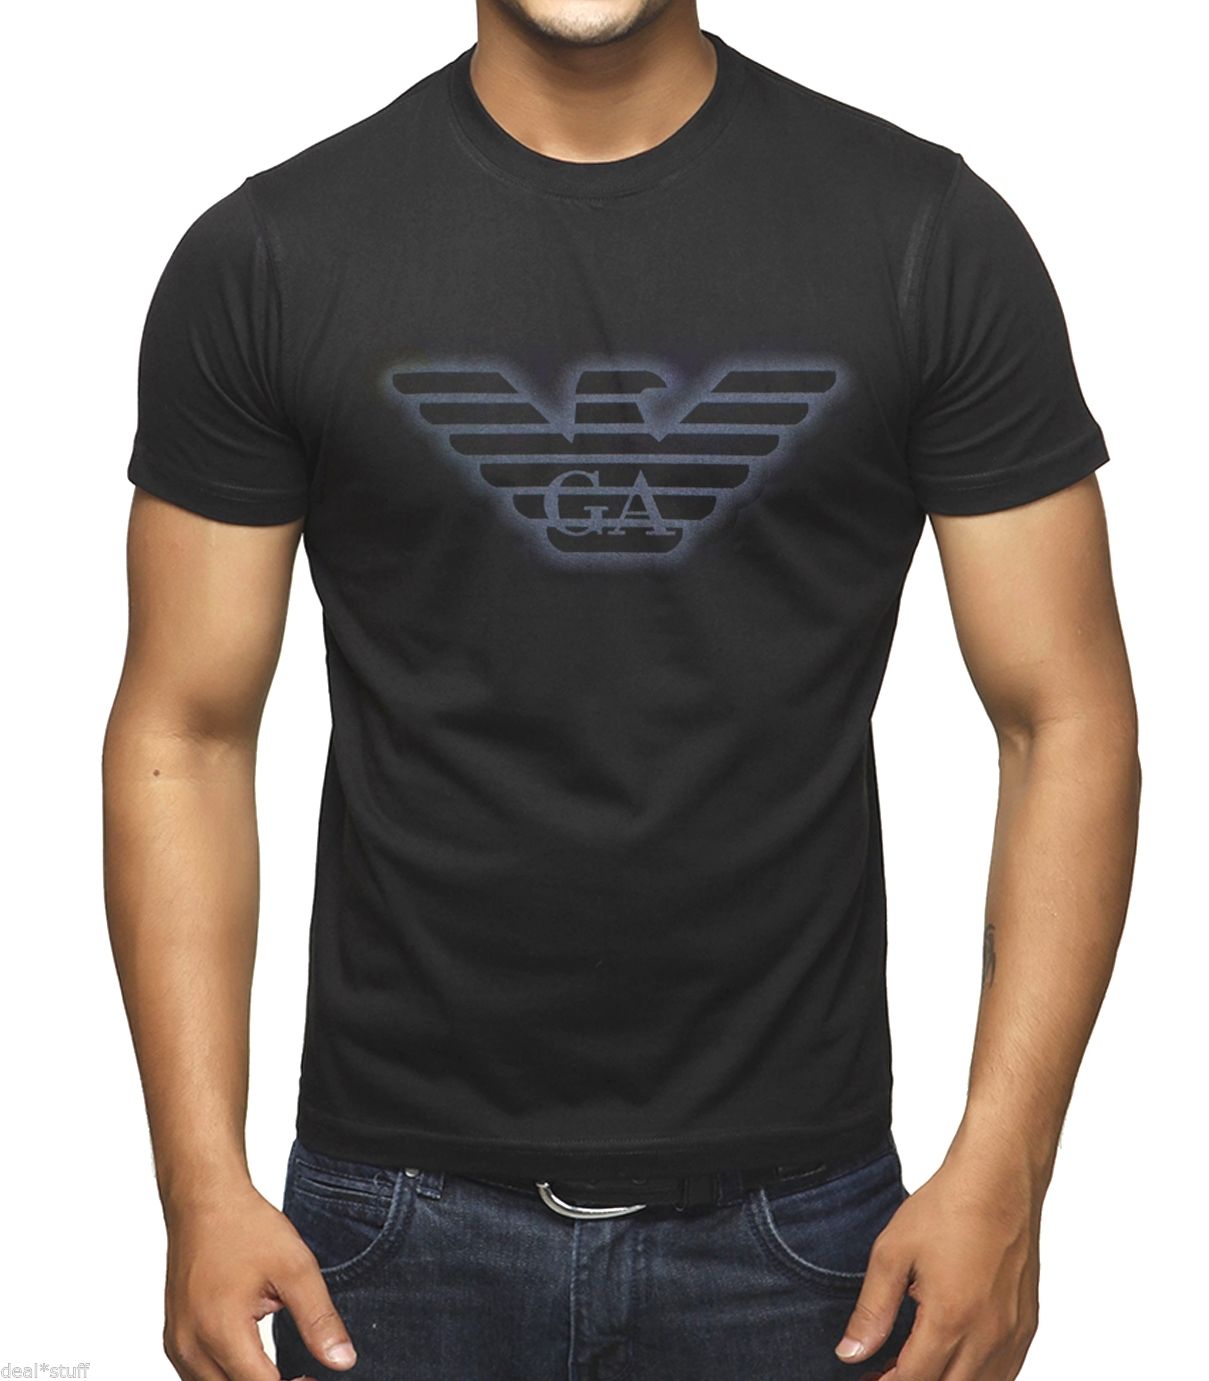 BNWT Emporio Armani stylish t-shirt available in M,L and XL size 